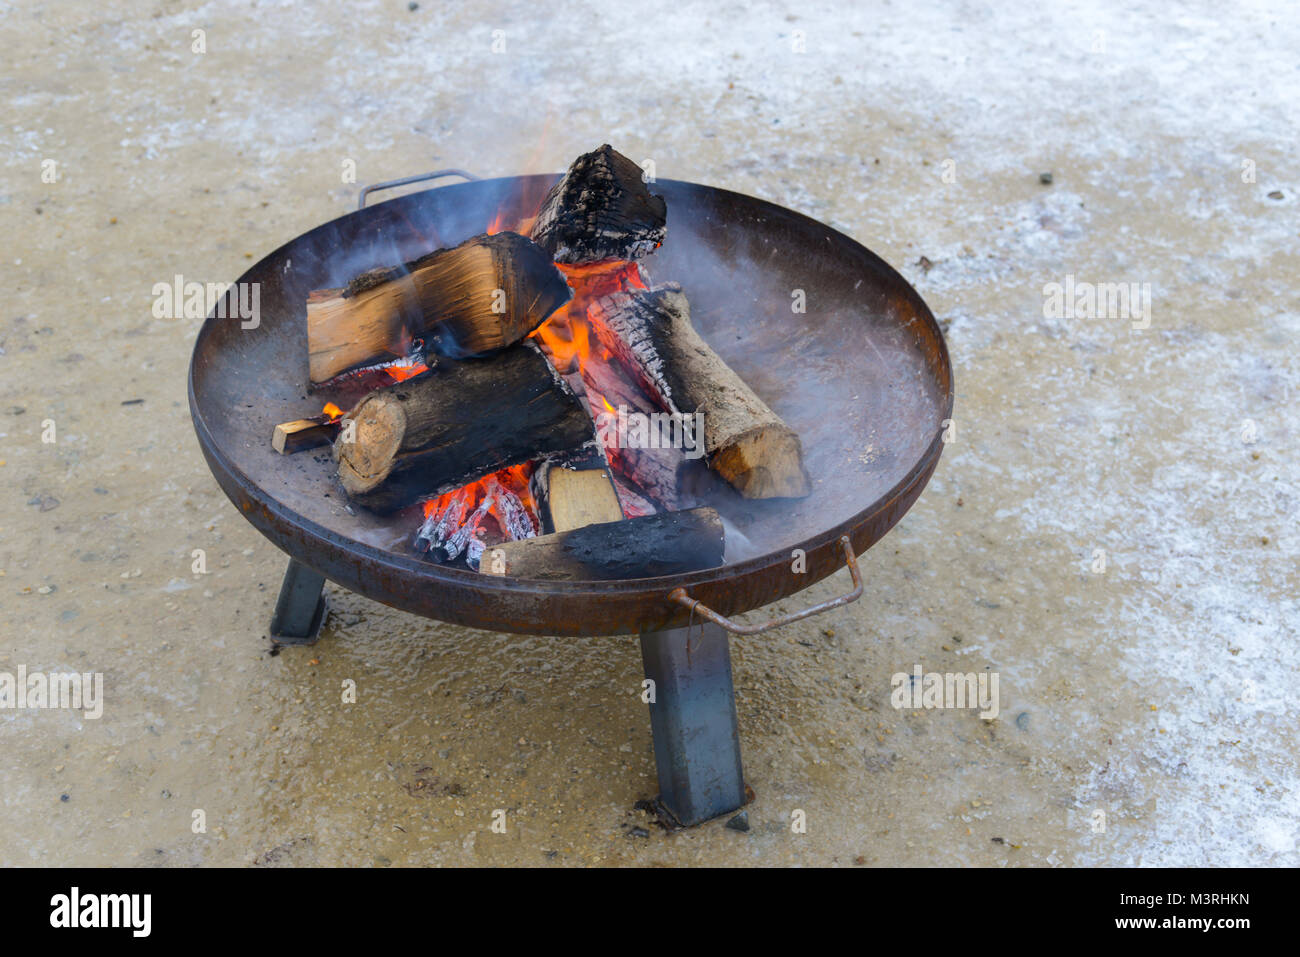 aereal view on a fire place with a metal bowl and burning wood. Stock Photo